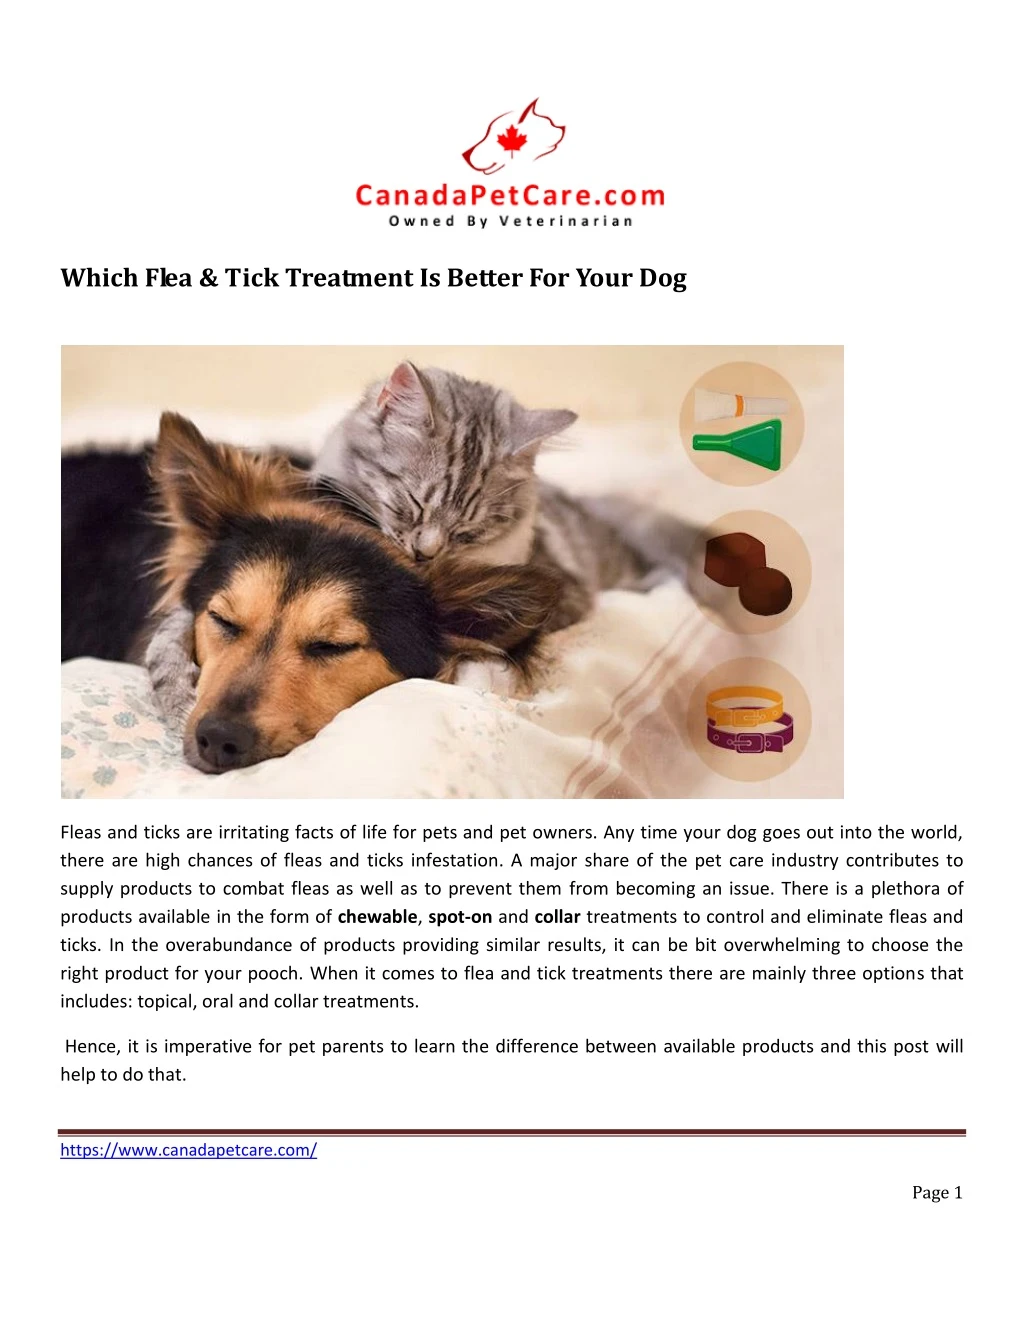 which flea tick treatment is better for your dog